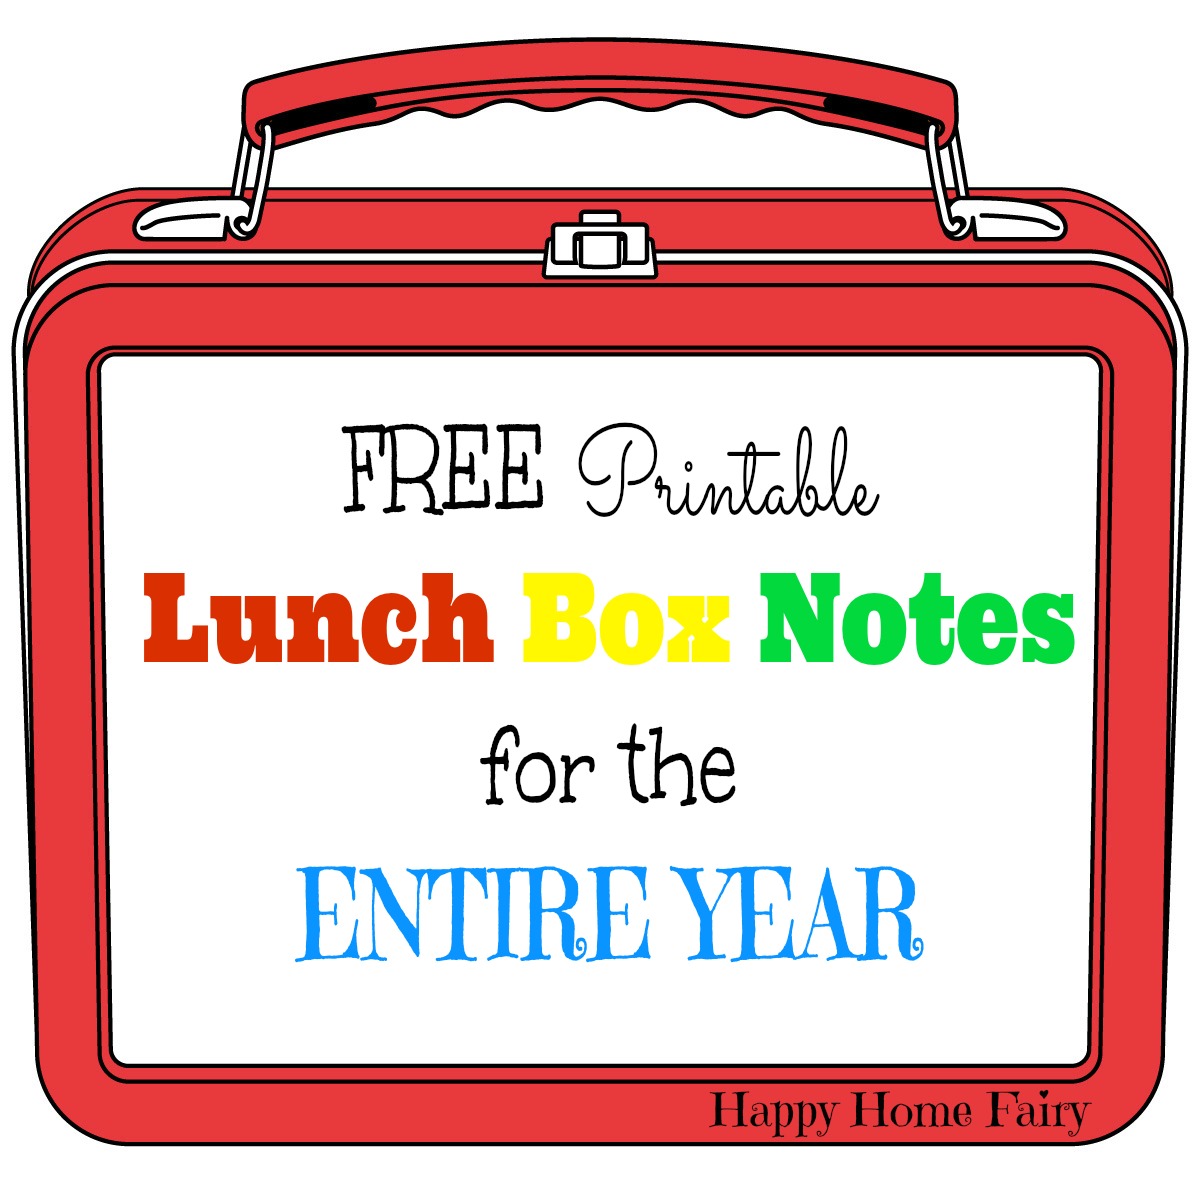 FREE Printable Lunch Box Notes for the ENTIRE YEAR - Happy Home Fairy